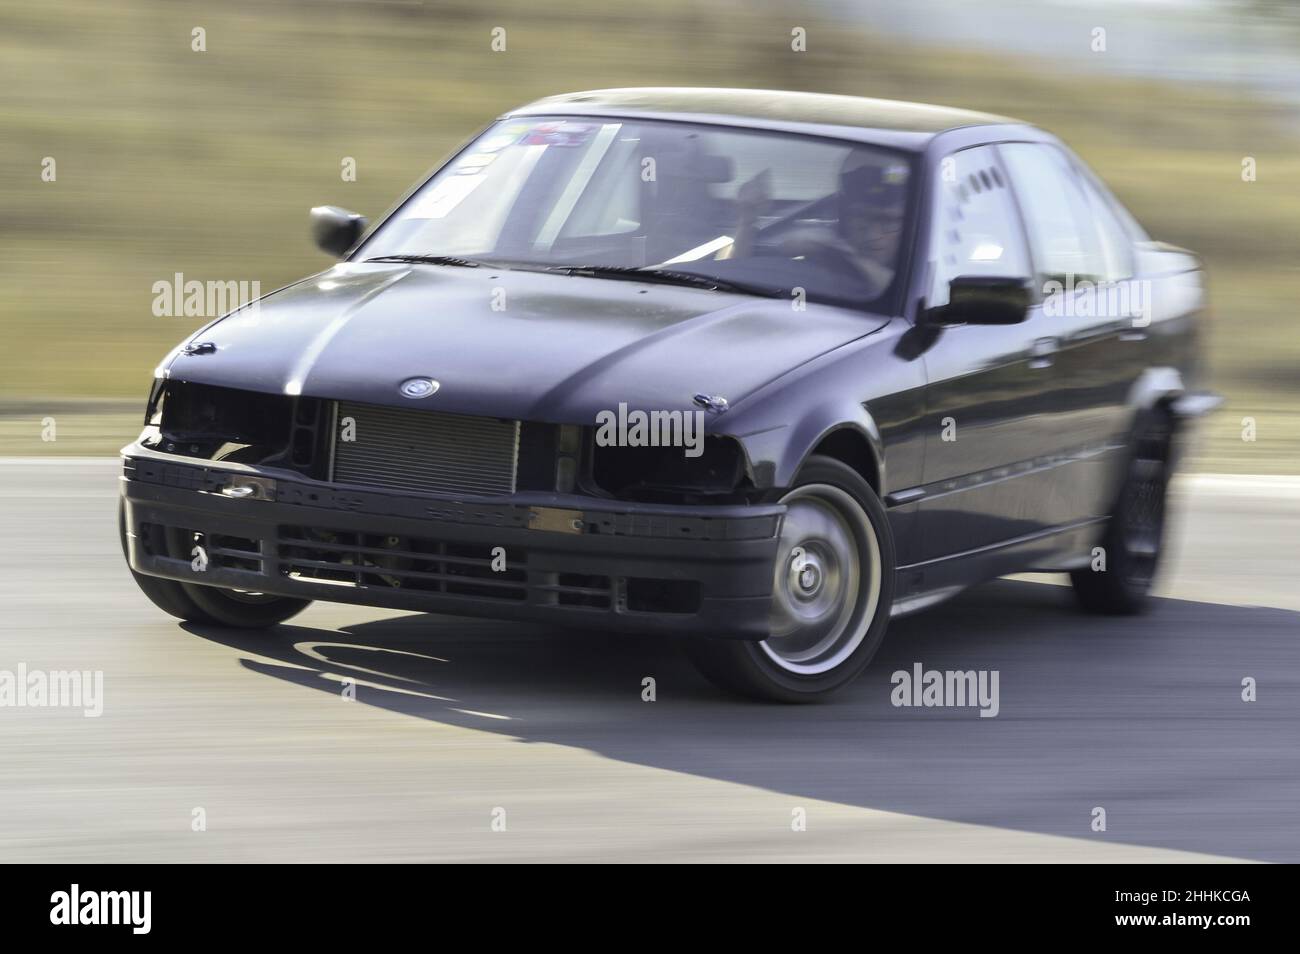 Modified and tuned BMW E34 for drifting on the track Stock Photo